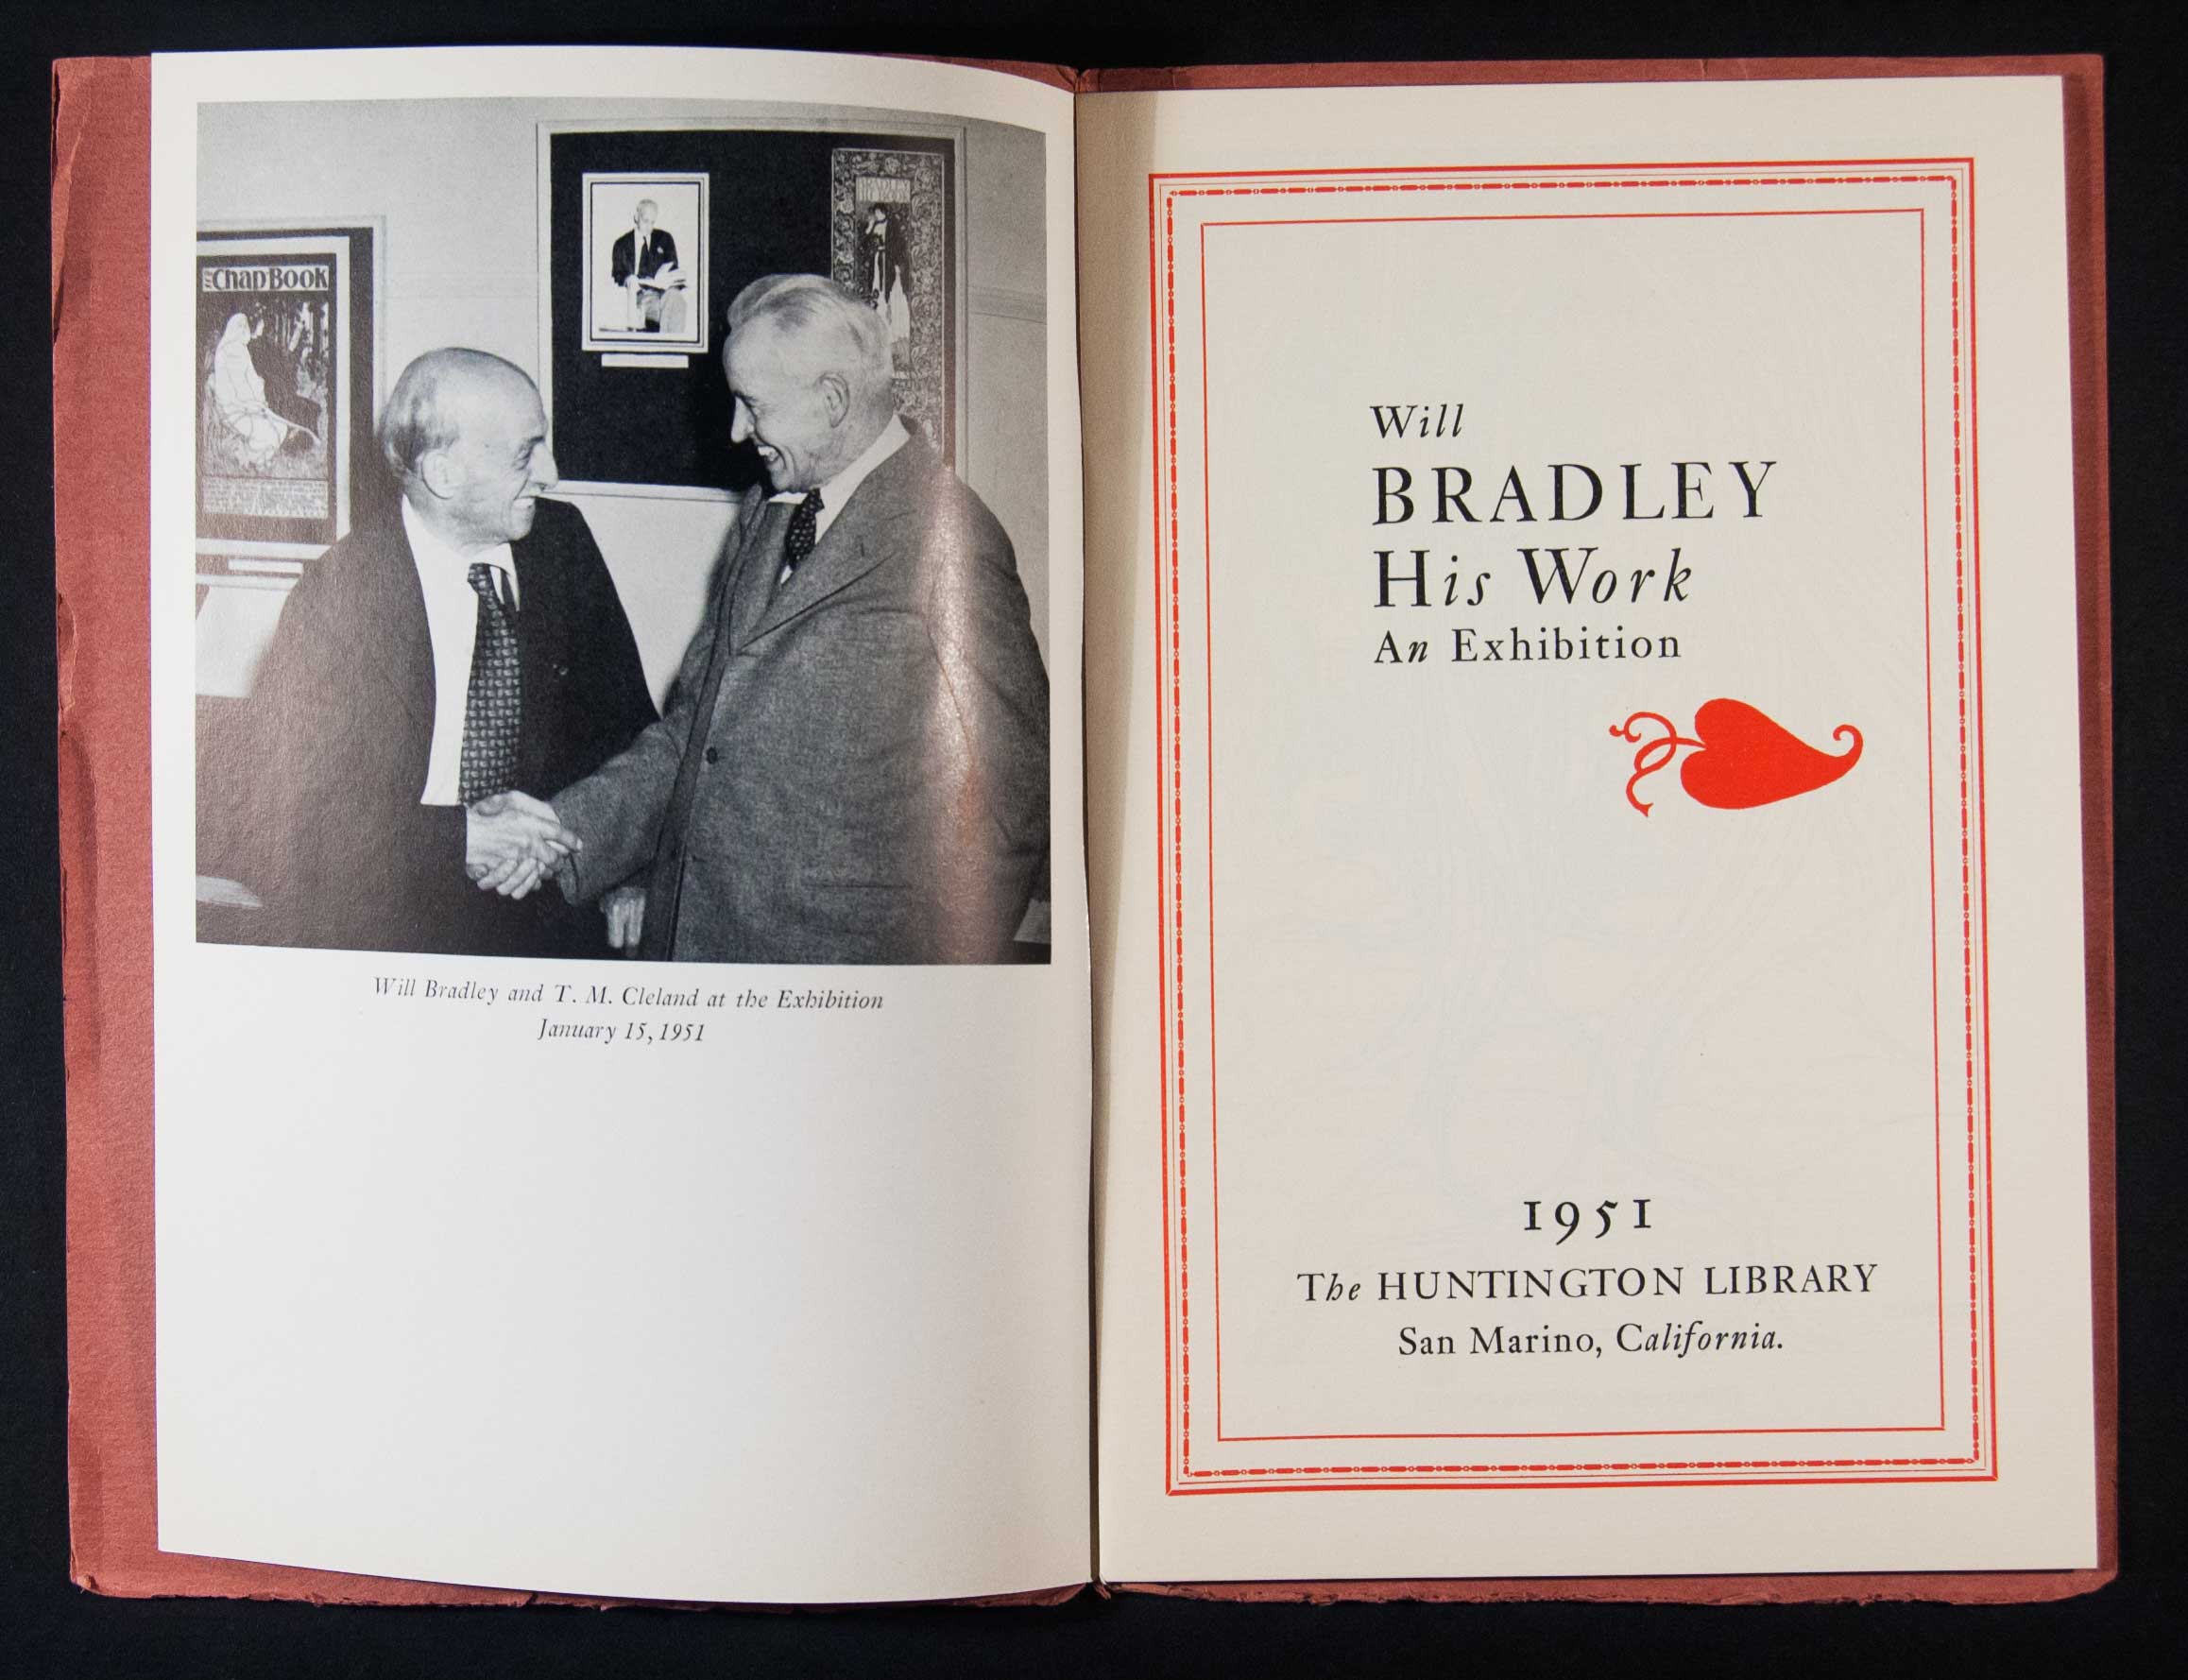 Will Bradley, his work: an exhibition